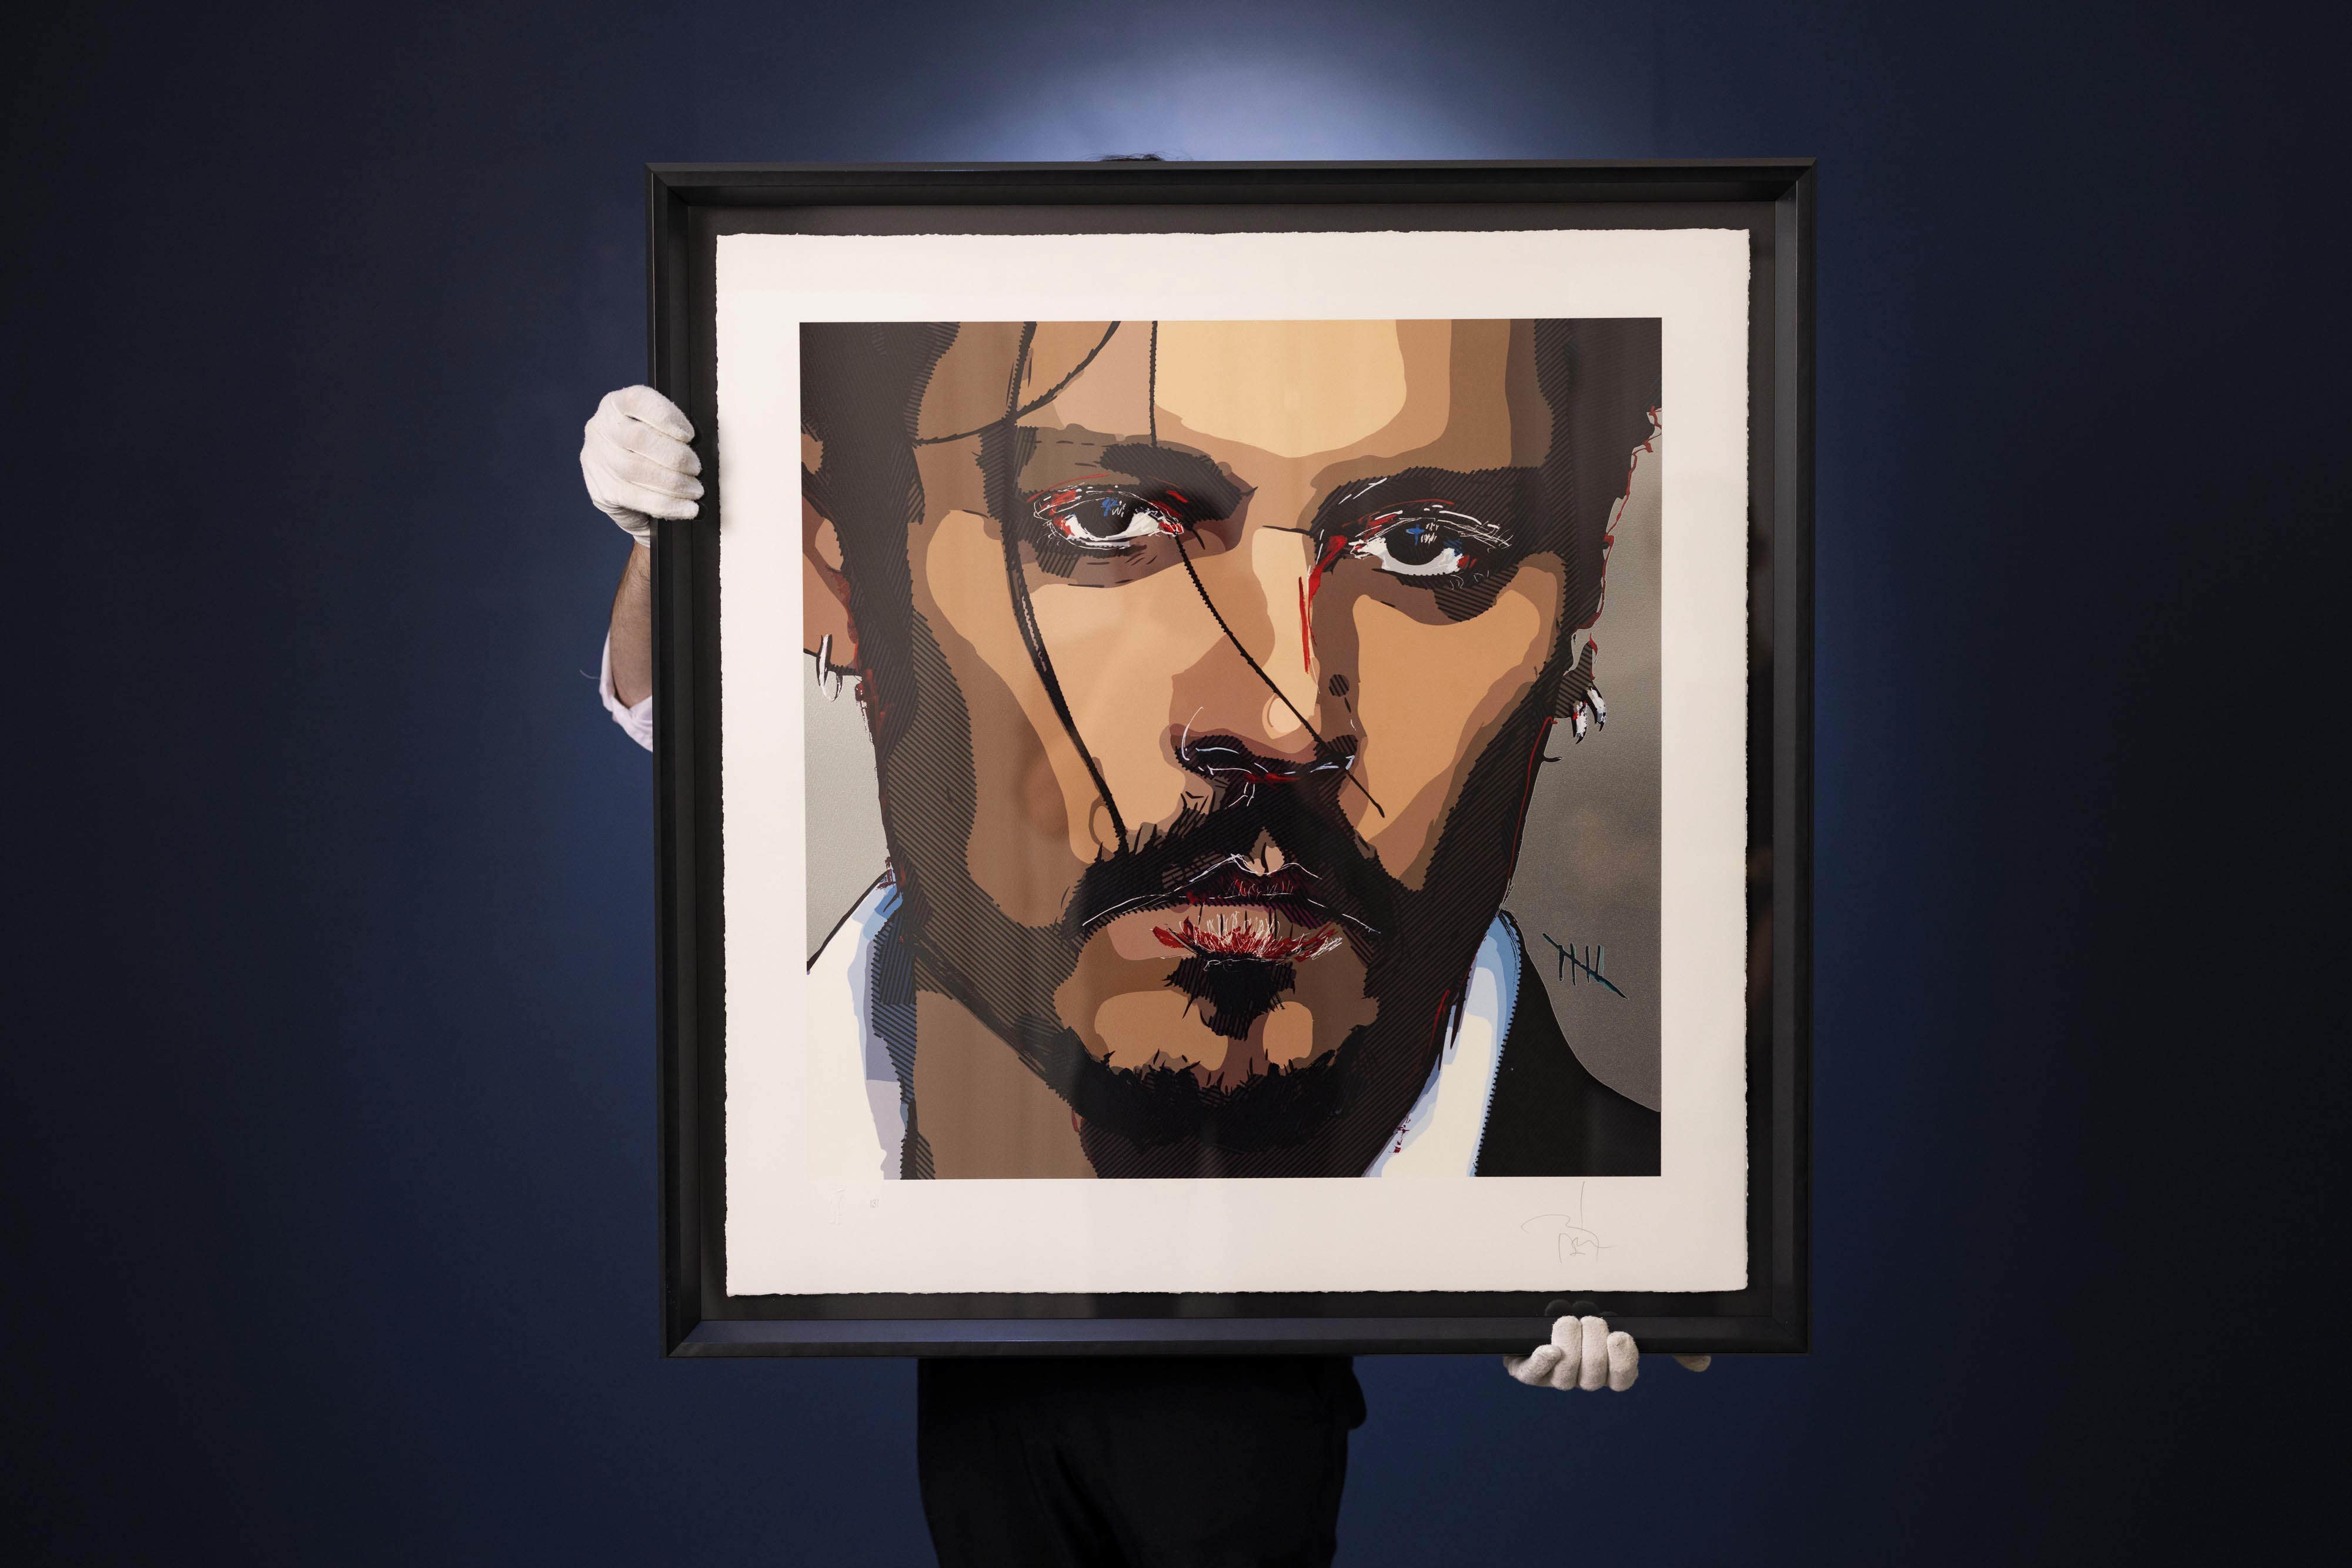 A self-portrait by Johnny Depp titled Five is unveiled at Castle Fine Art in London ahead of prints being made available to buy (David Parry/PA)